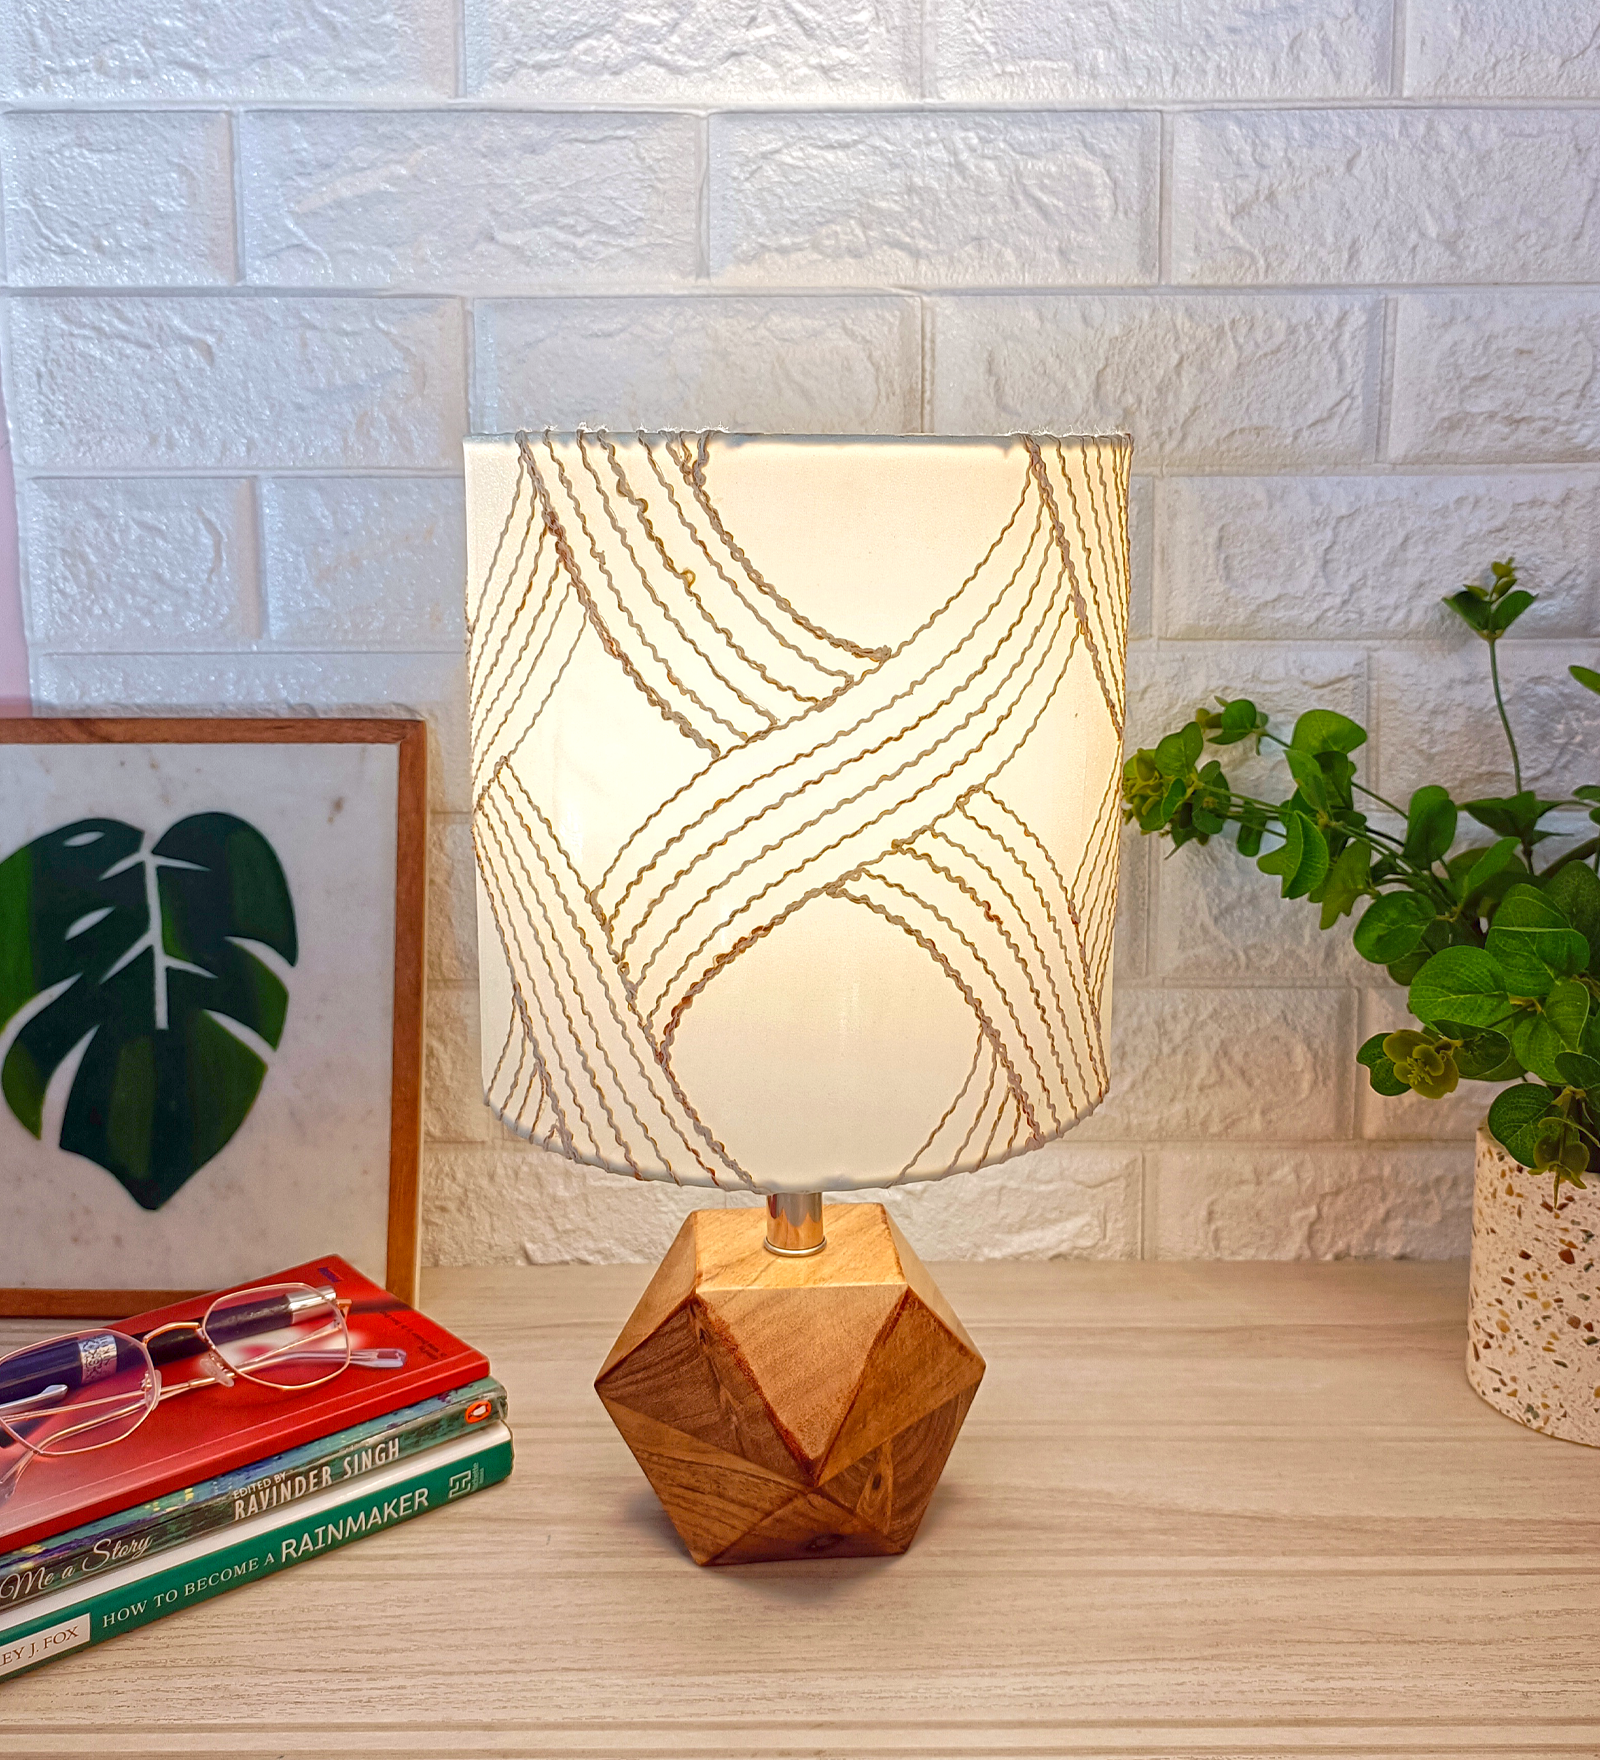 Exquisite Wooden table lamp